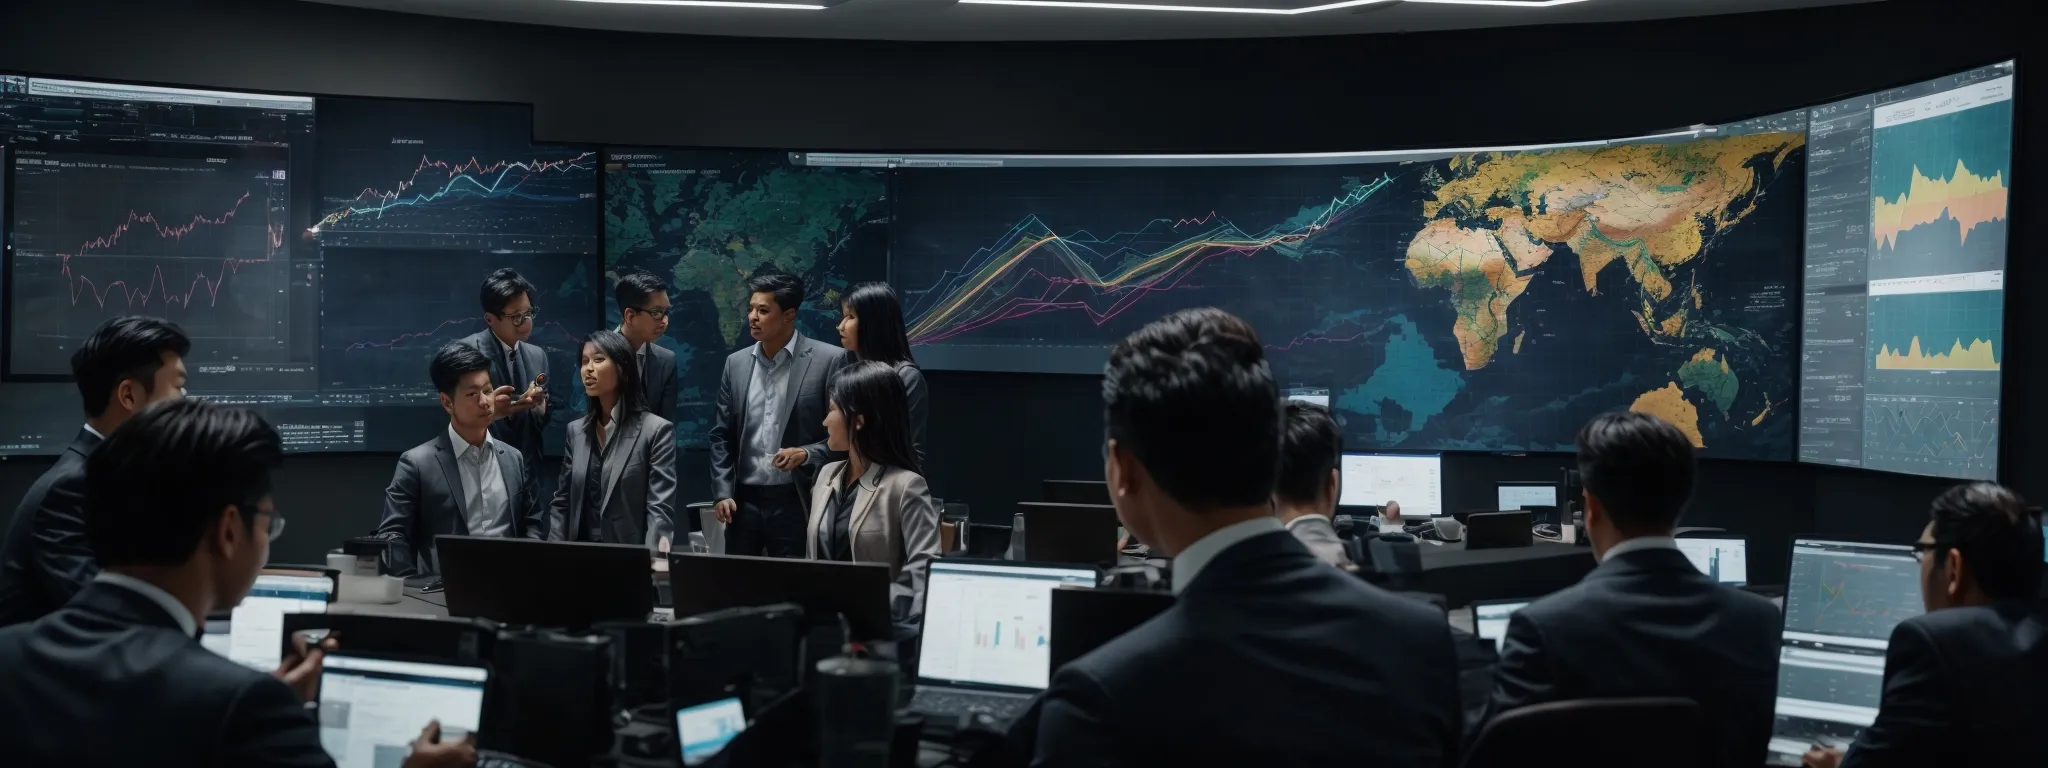 a group of professionals gathered around a large monitor displaying colorful graphs and data analysis, actively engaged in a strategic seo meeting.